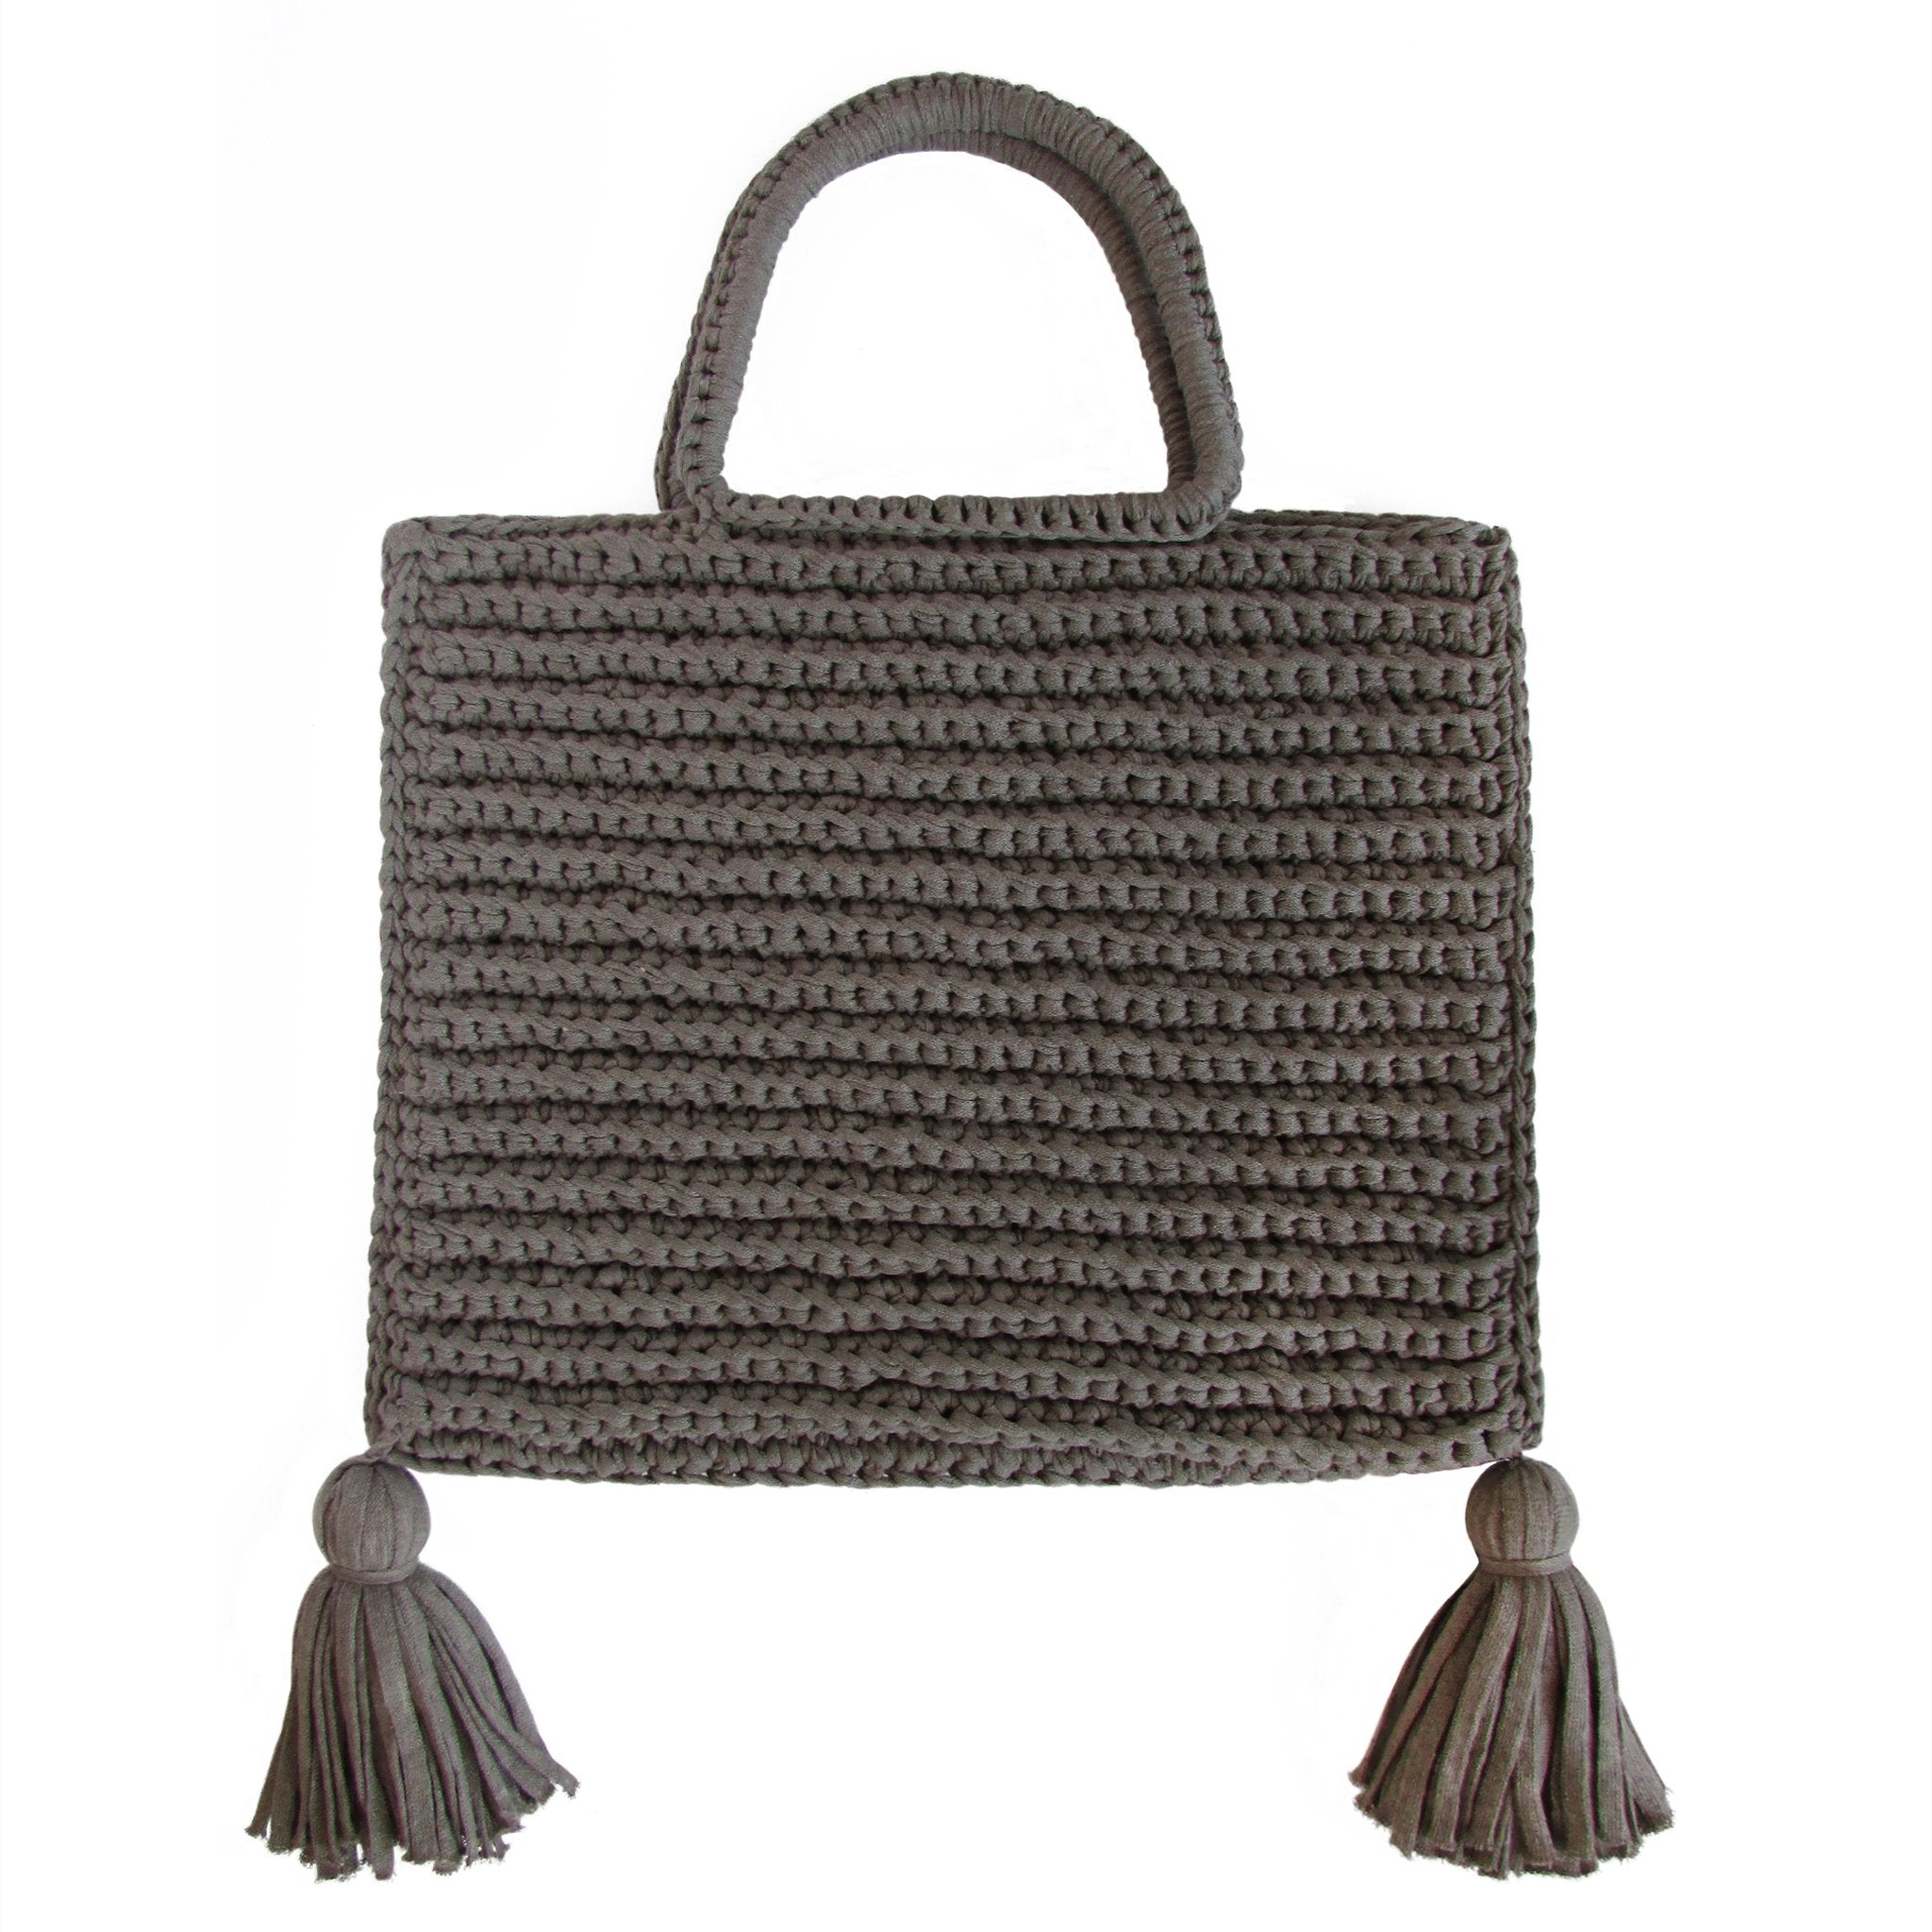 Handcrafted Cotton Tassel Tote bag in Taupe by Binge Knitting